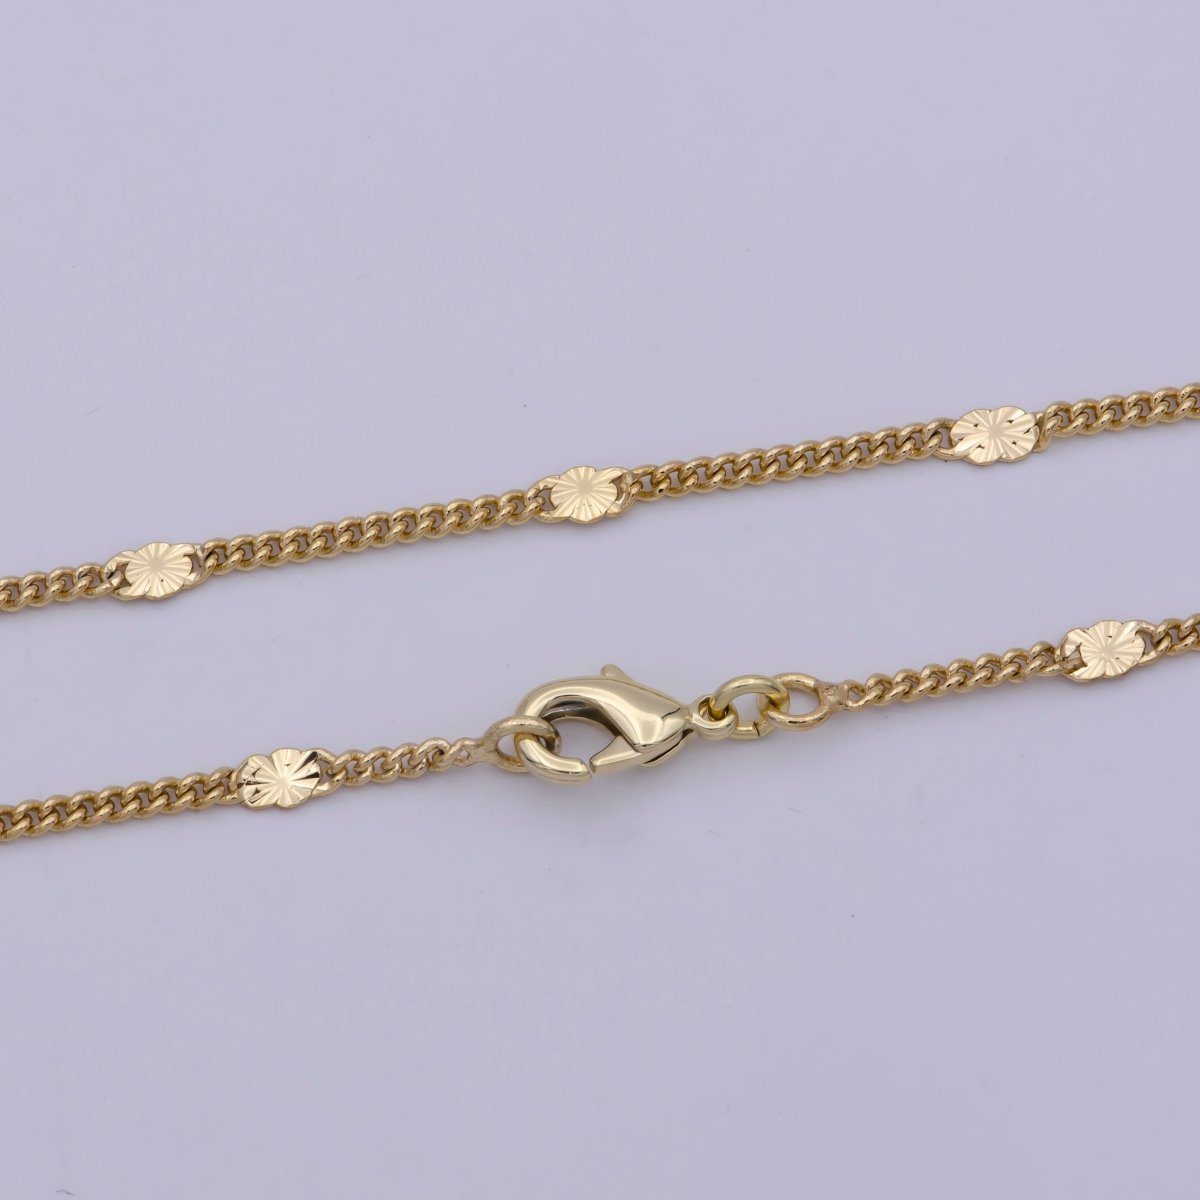 14k Gold Filled Curb Necklace Dainty Curb Necklace 15.5, 17.5, 19.5 inch long Ready to Wear Chain | WA-462 to WA-464 Clearance Pricing - DLUXCA